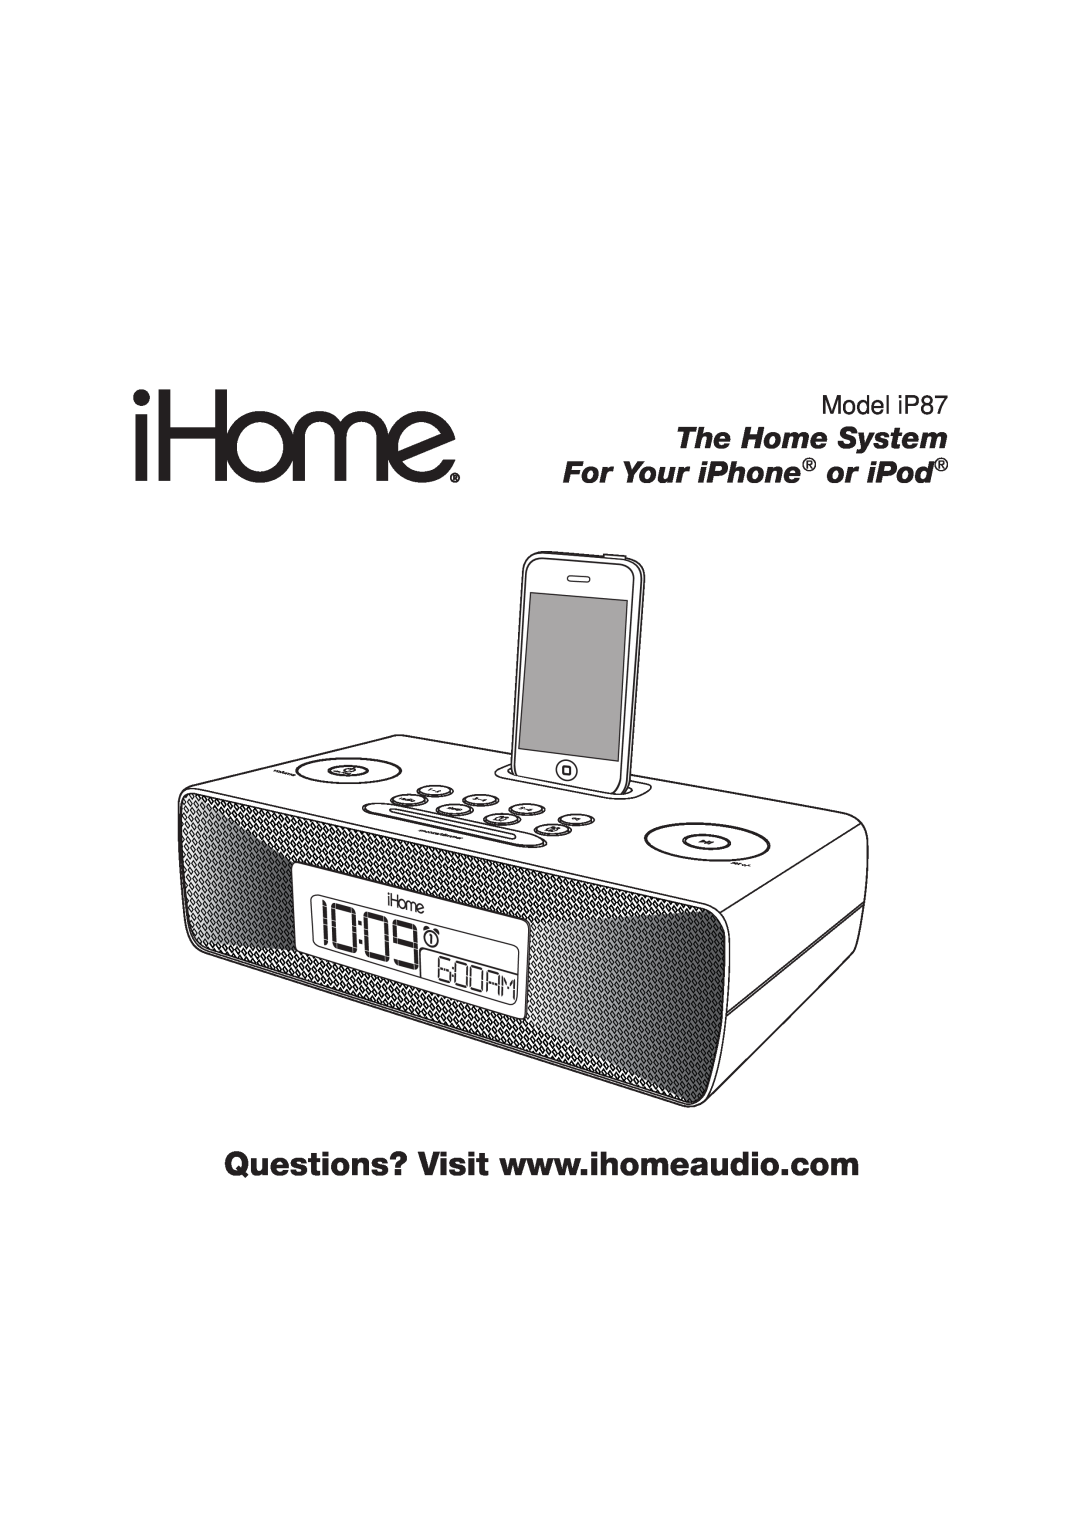 iHome IP87 manual The Home System For Your iPhone or iPod, Model iP87 